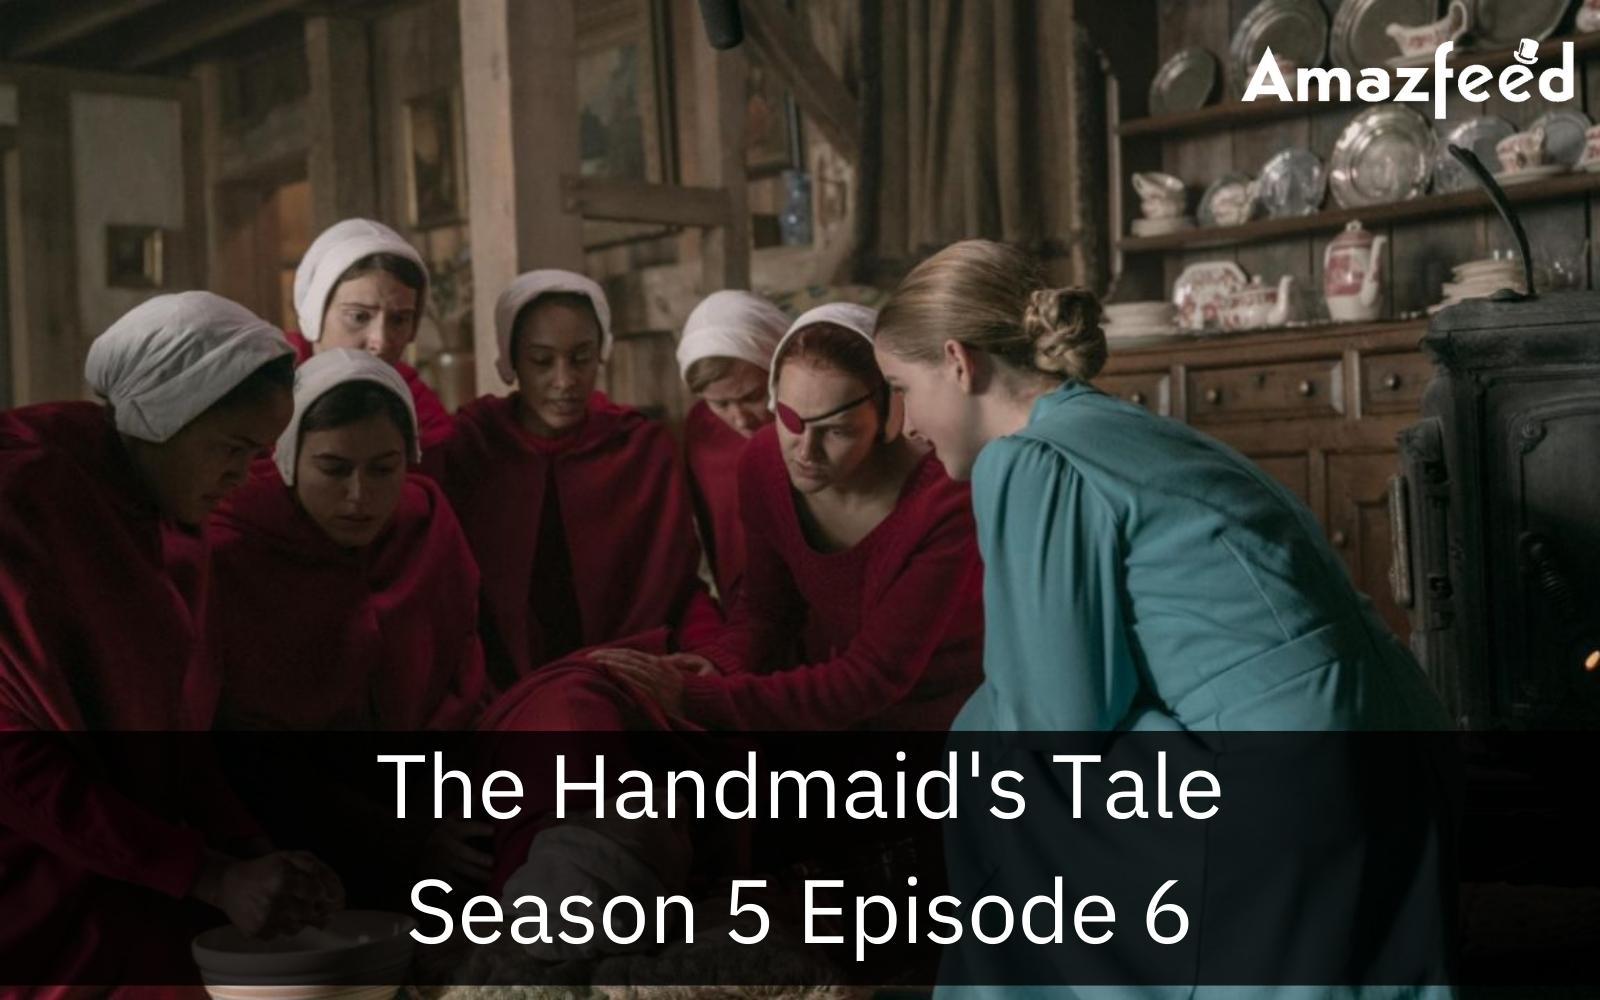 The Handmaid’s Tale Season 5 Episode 6 Premiere Time in different time zones